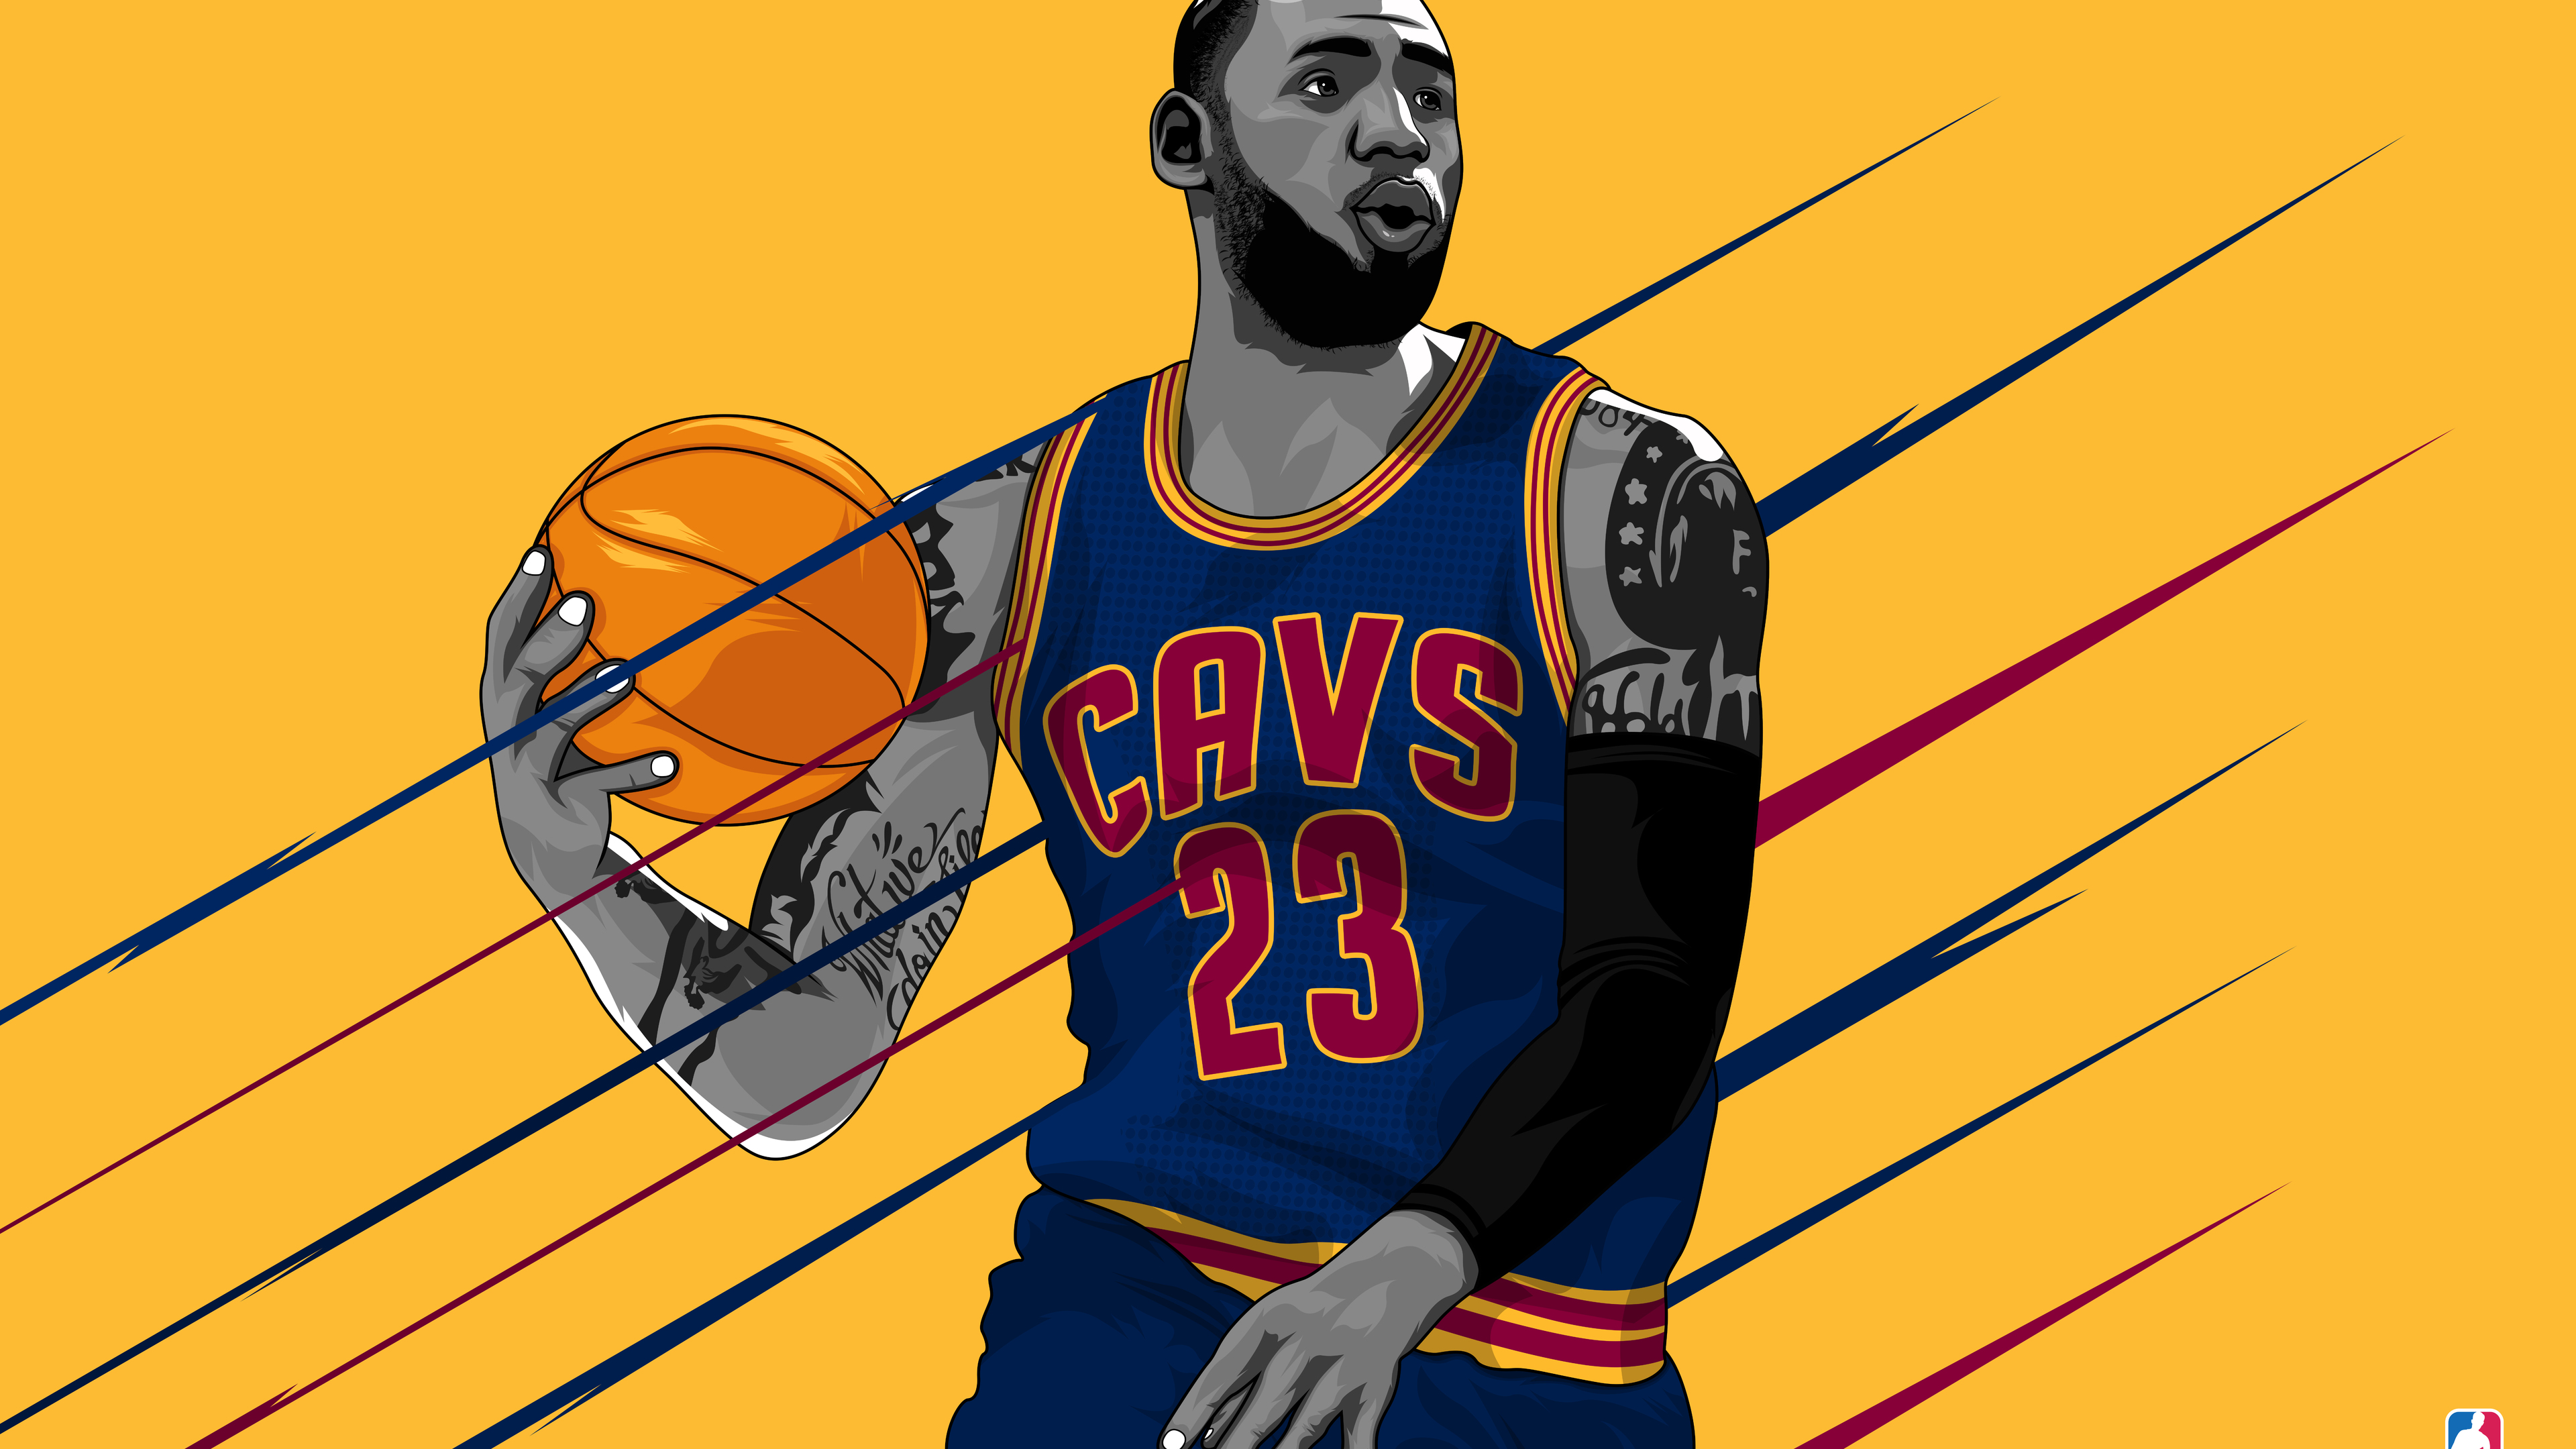 310 Best Lebron james wallpapers ideas in 2023  lebron james wallpapers  nba art nba basketball art